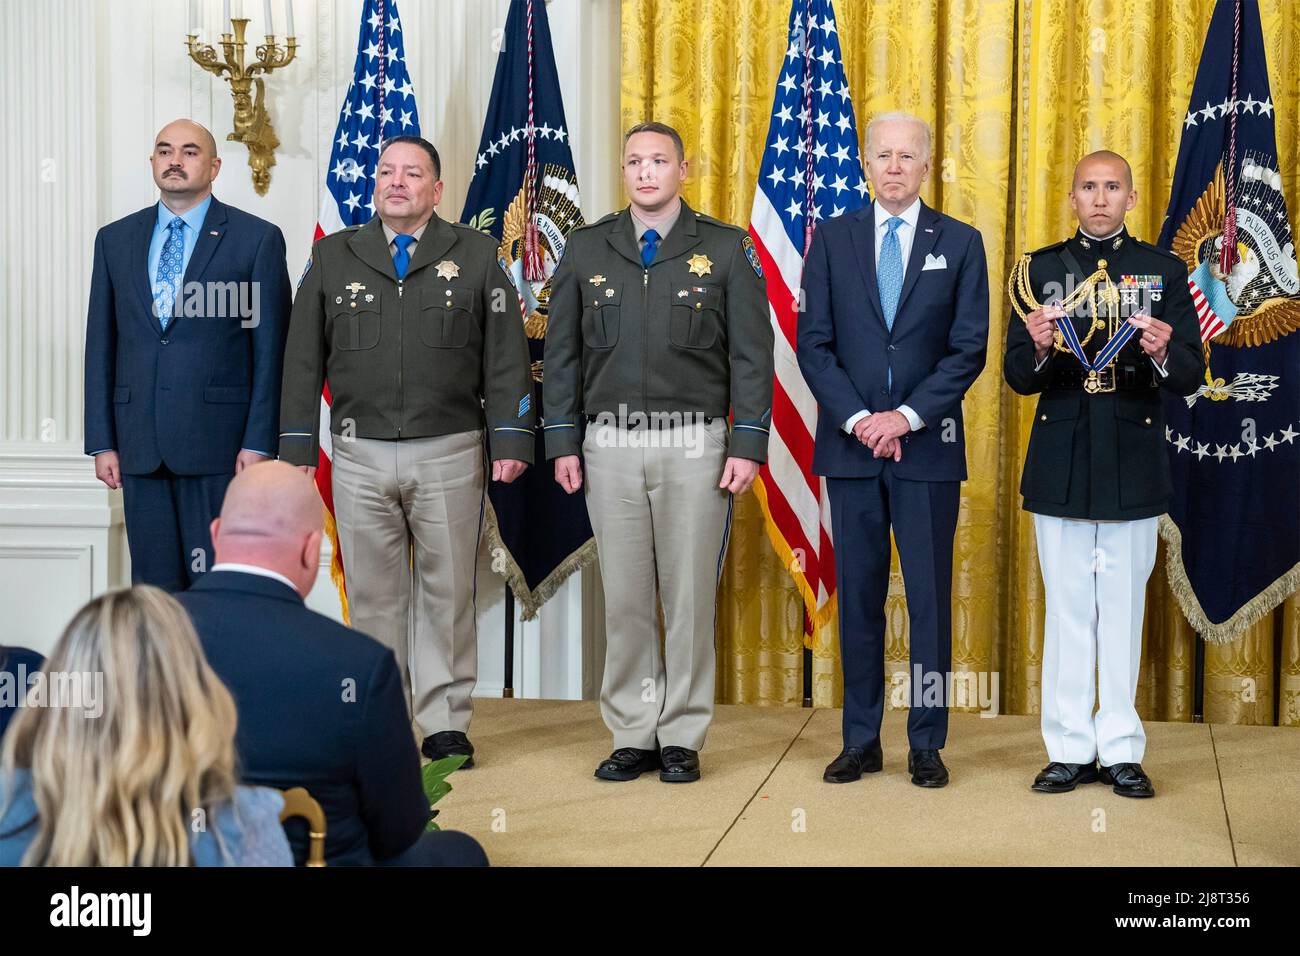 Washington, United States of America. 16 May, 2022. U.S President Joe Biden, holds a ceremony to award the Medals of Valor to public safety officers in the East Room of the White House, May 16, 2022 in Washington, D.C. Credit: Adam Schultz/White House Photo/Alamy Live News Stock Photo